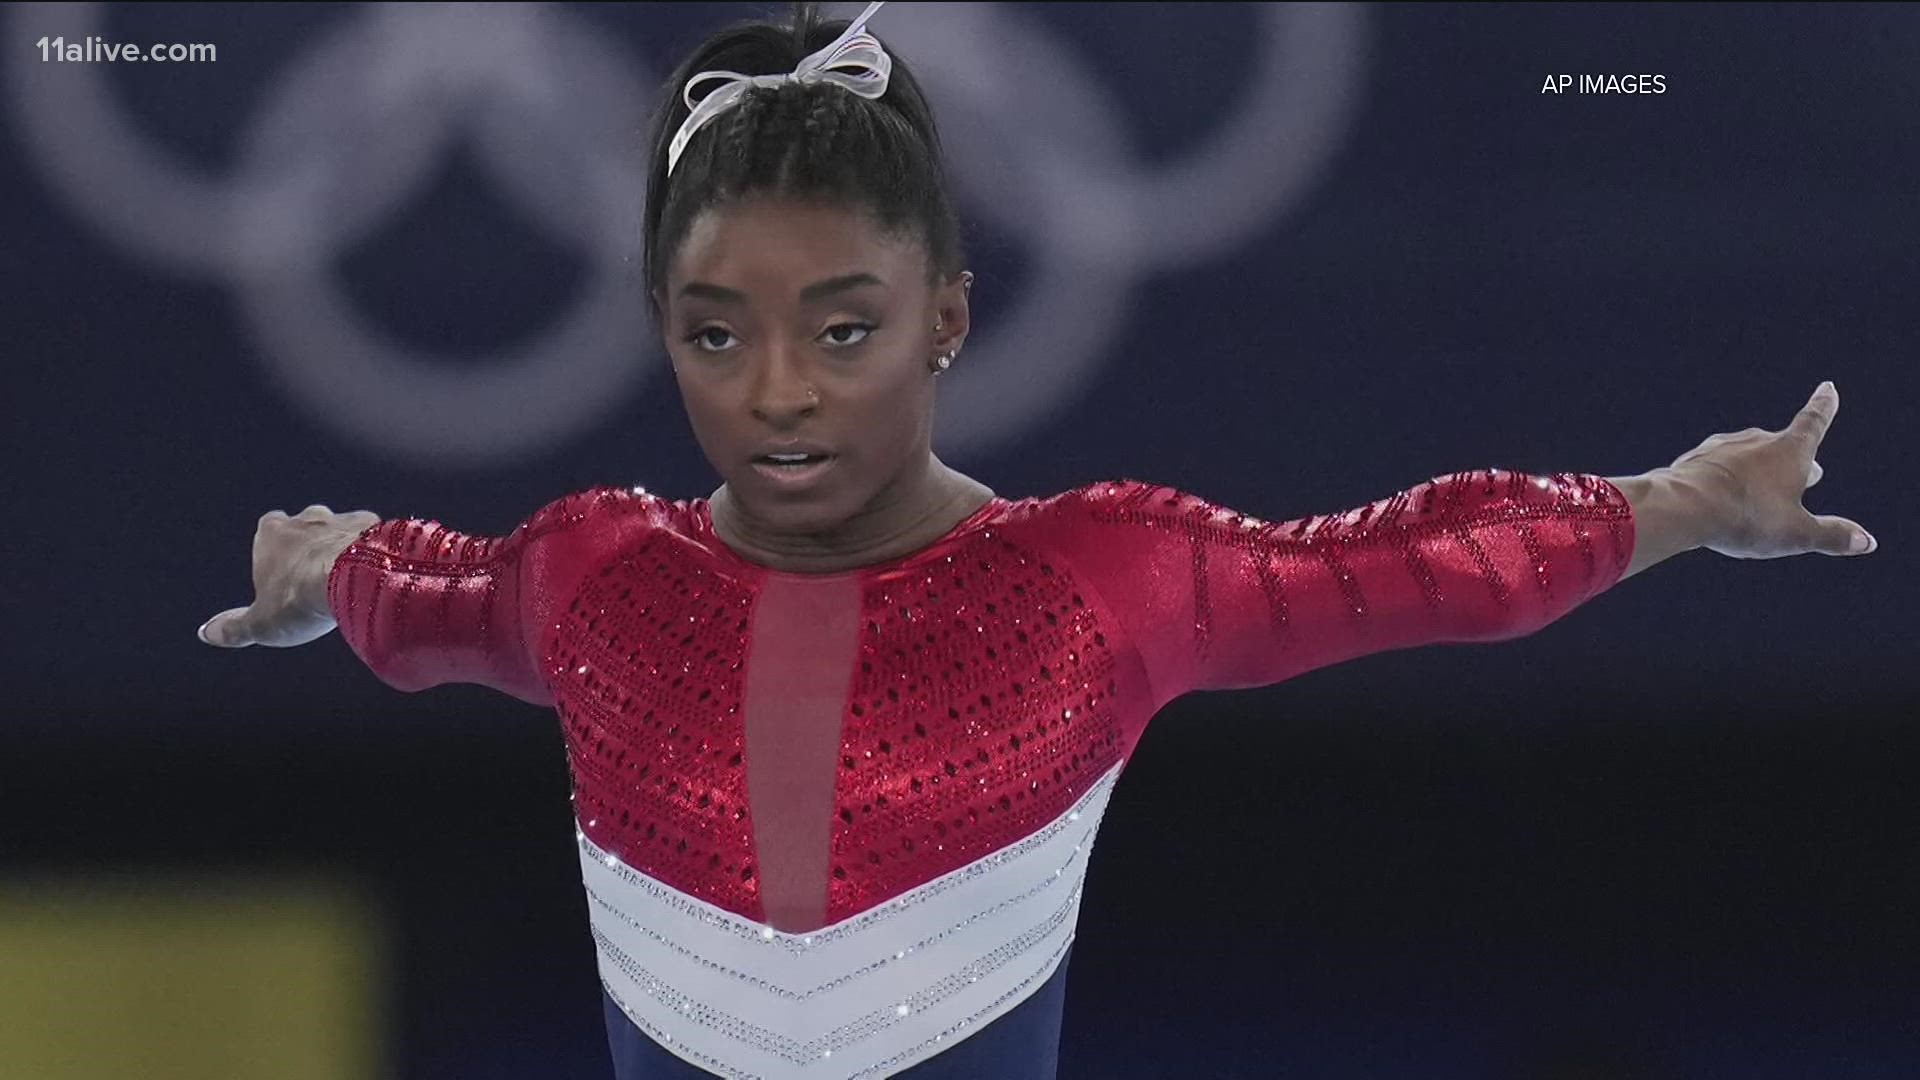 Biles had withdrawn from every other individual final so far as she deals with a mental block that in gymnastics is referred to as “the twisties.”